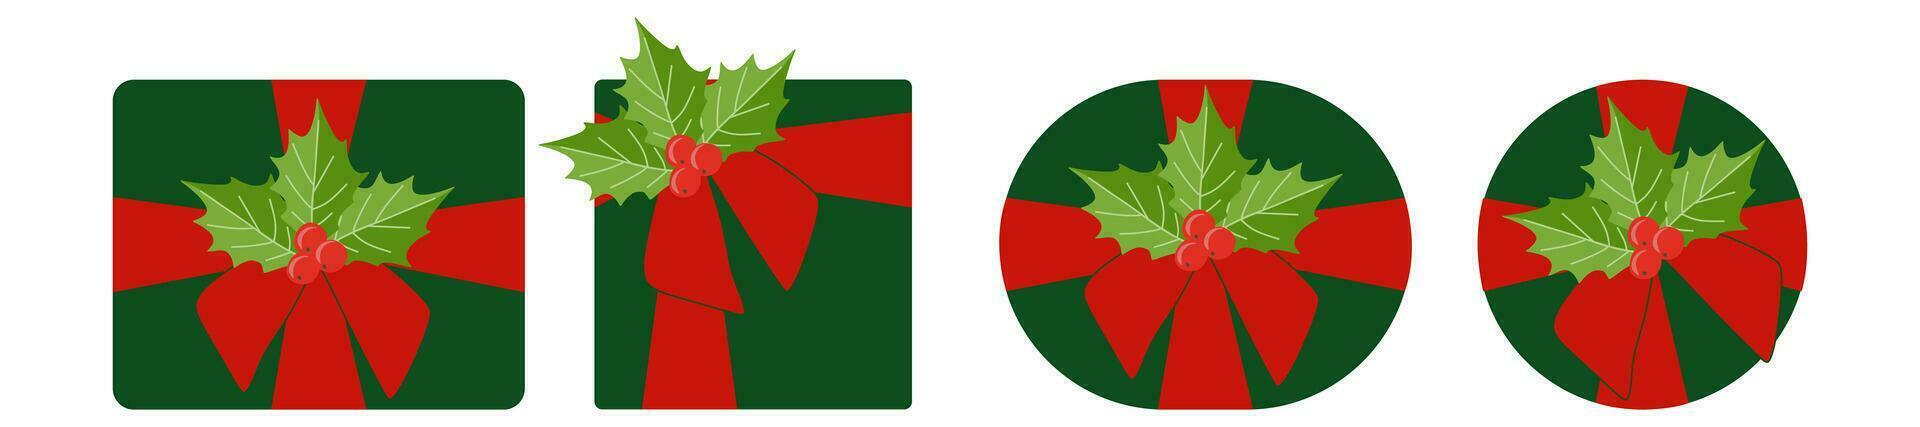 Set of Green Gift Boxes with Red Ribbon and Holly berry branches. Christmas Season Decoration. Vector Flat cartoon illustration isolated on white. Colorful Holiday Template for Postcard, Banner